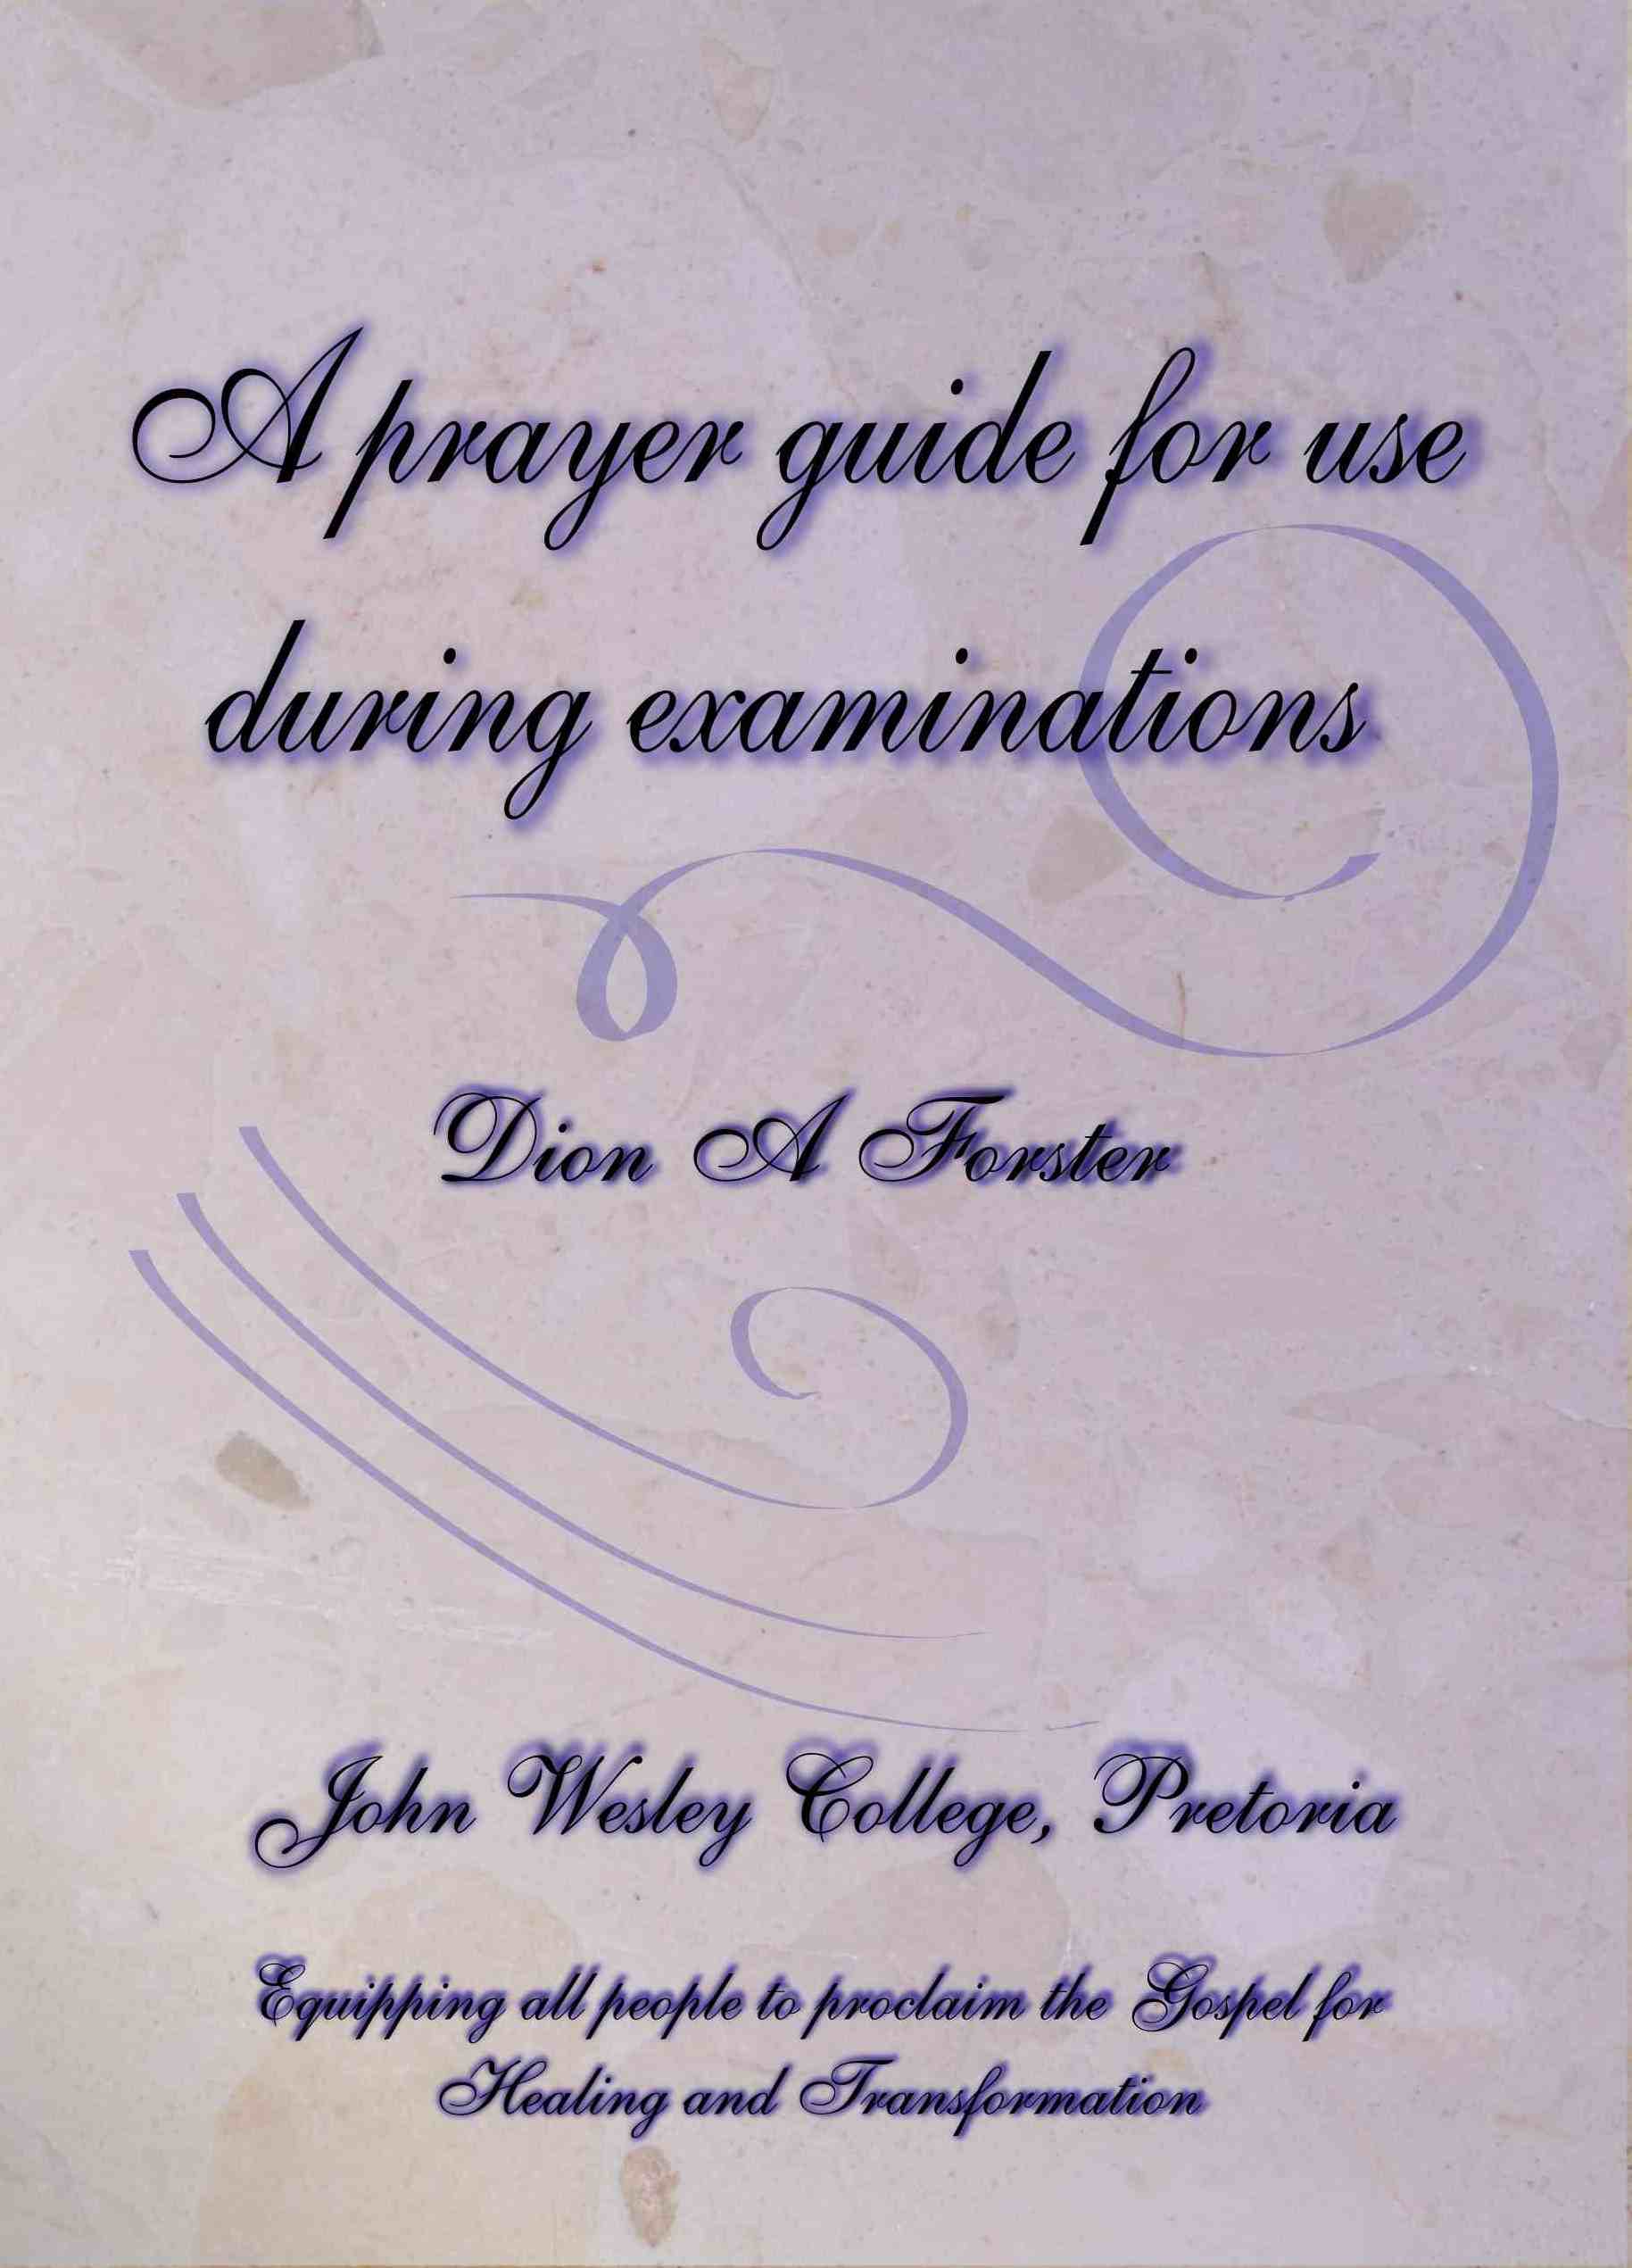 Prayer Guide for use during examinations